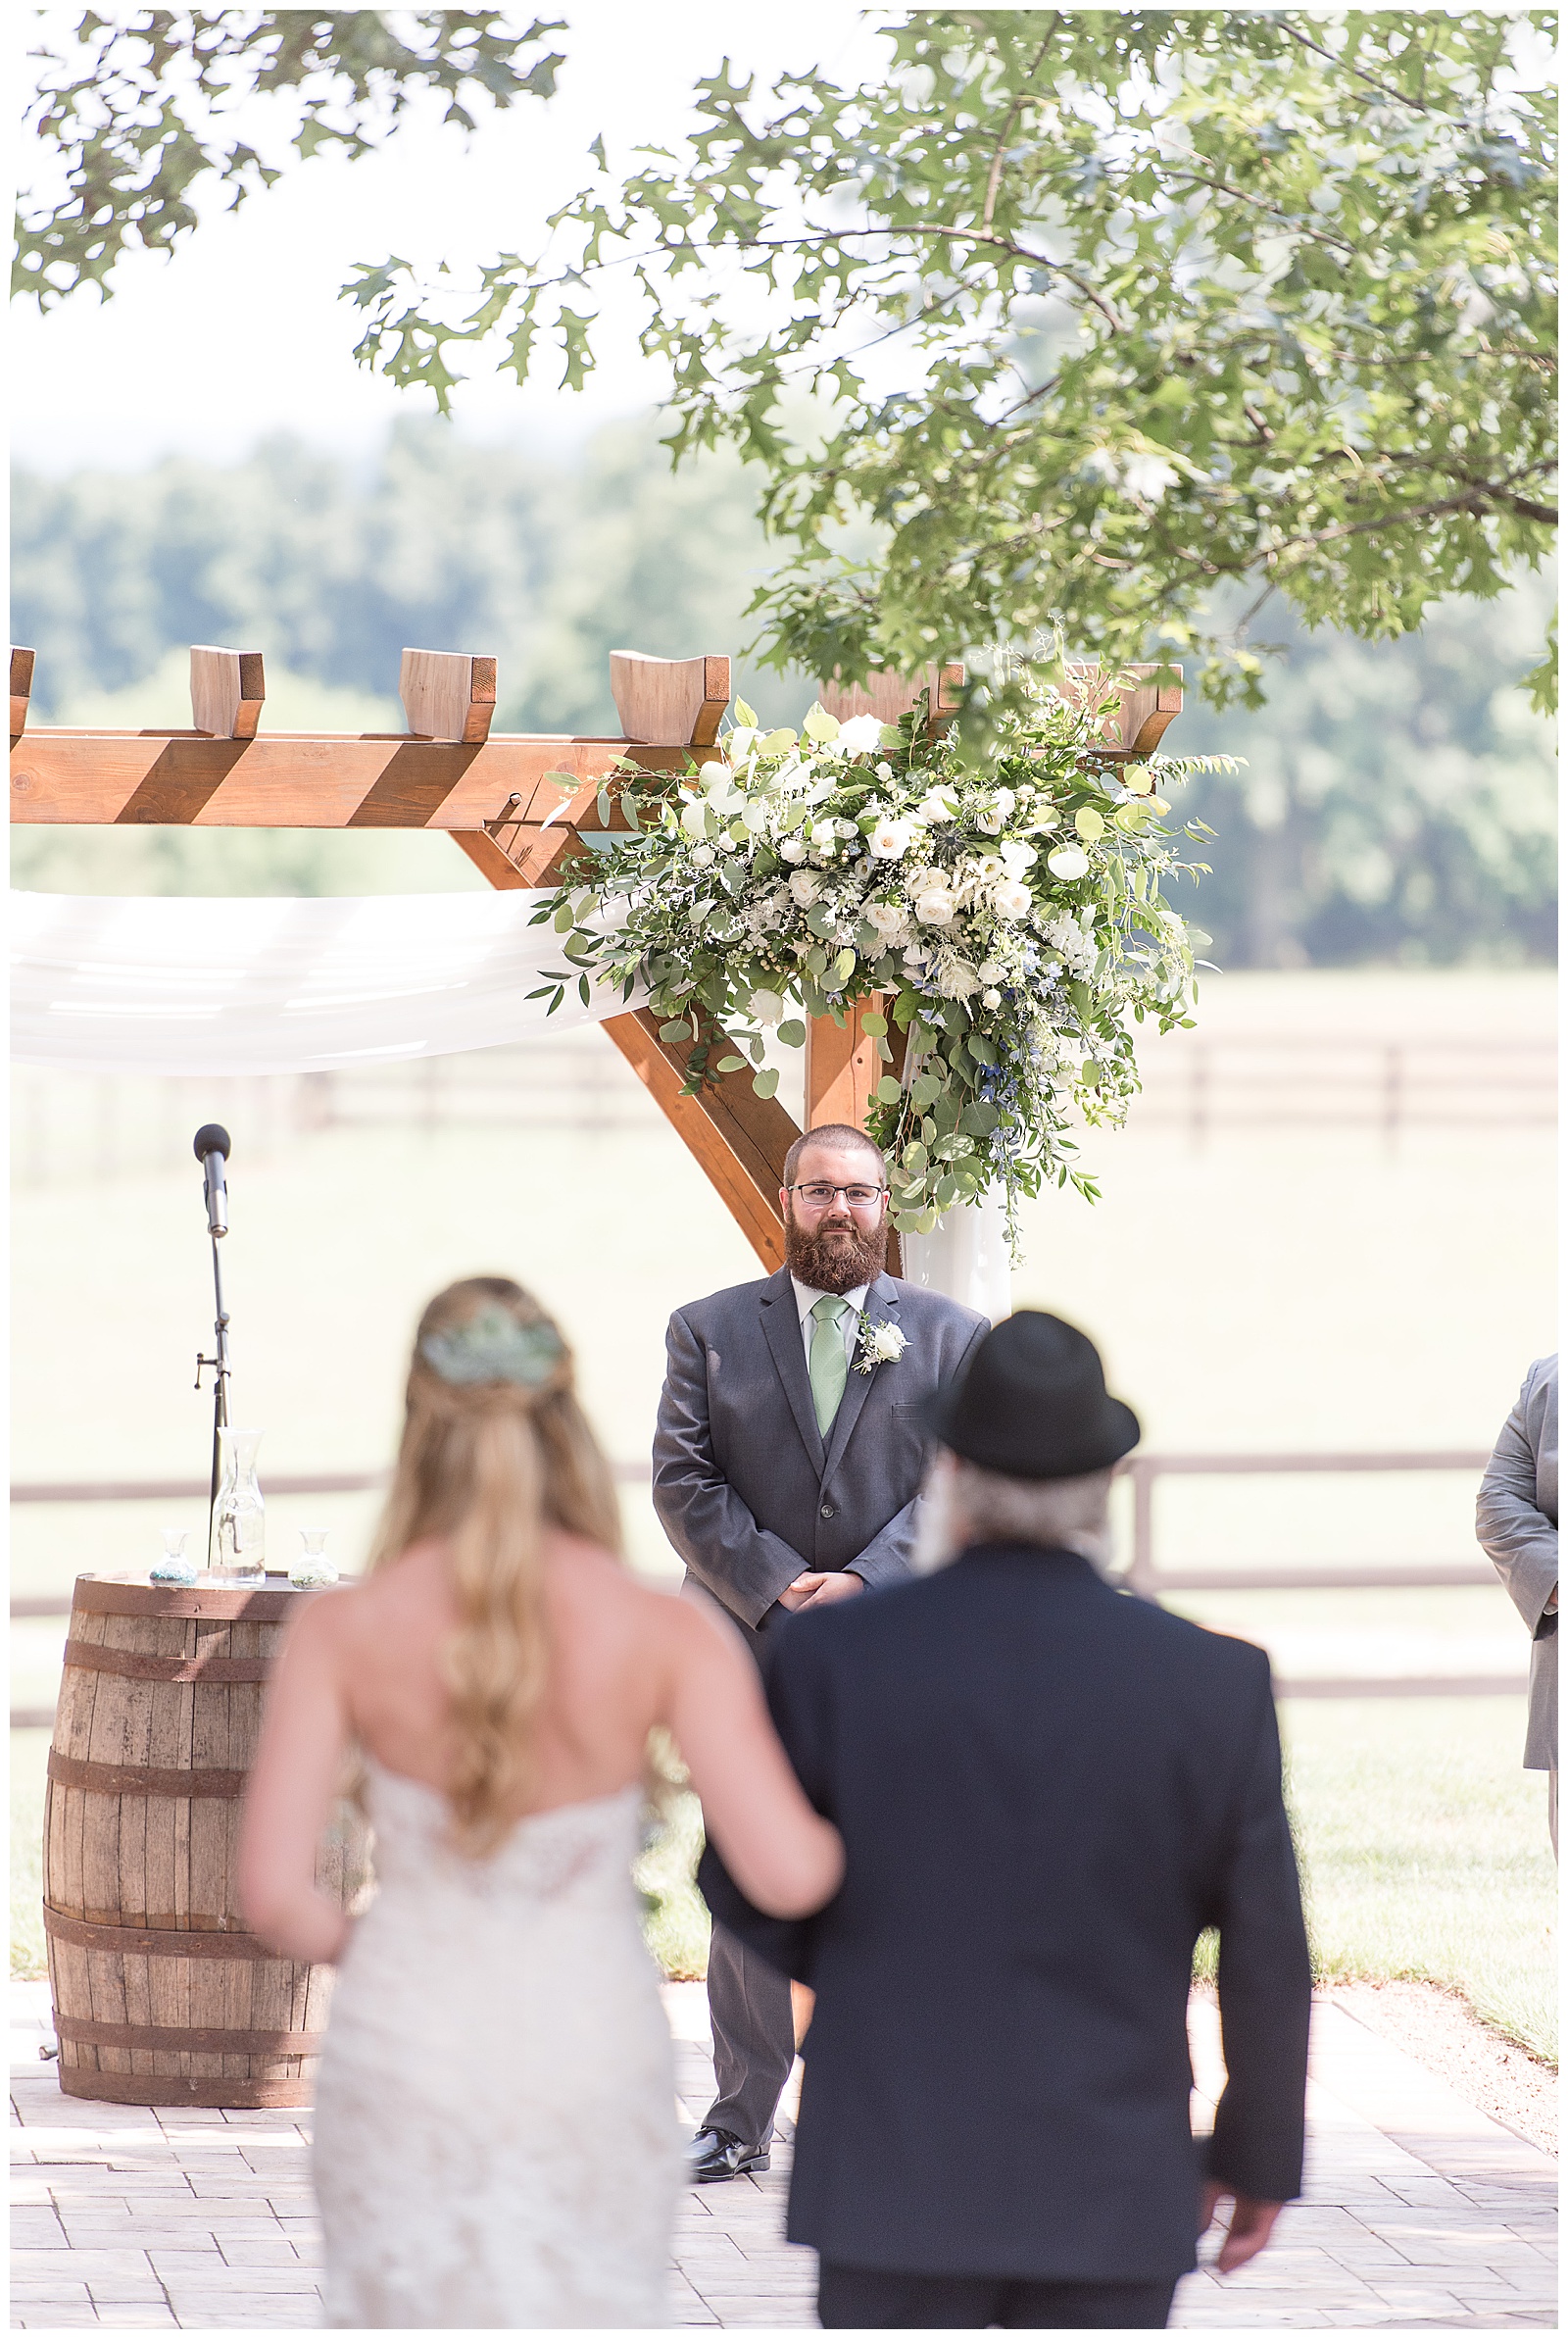 groom smiling as bride comes down aisle with her dad